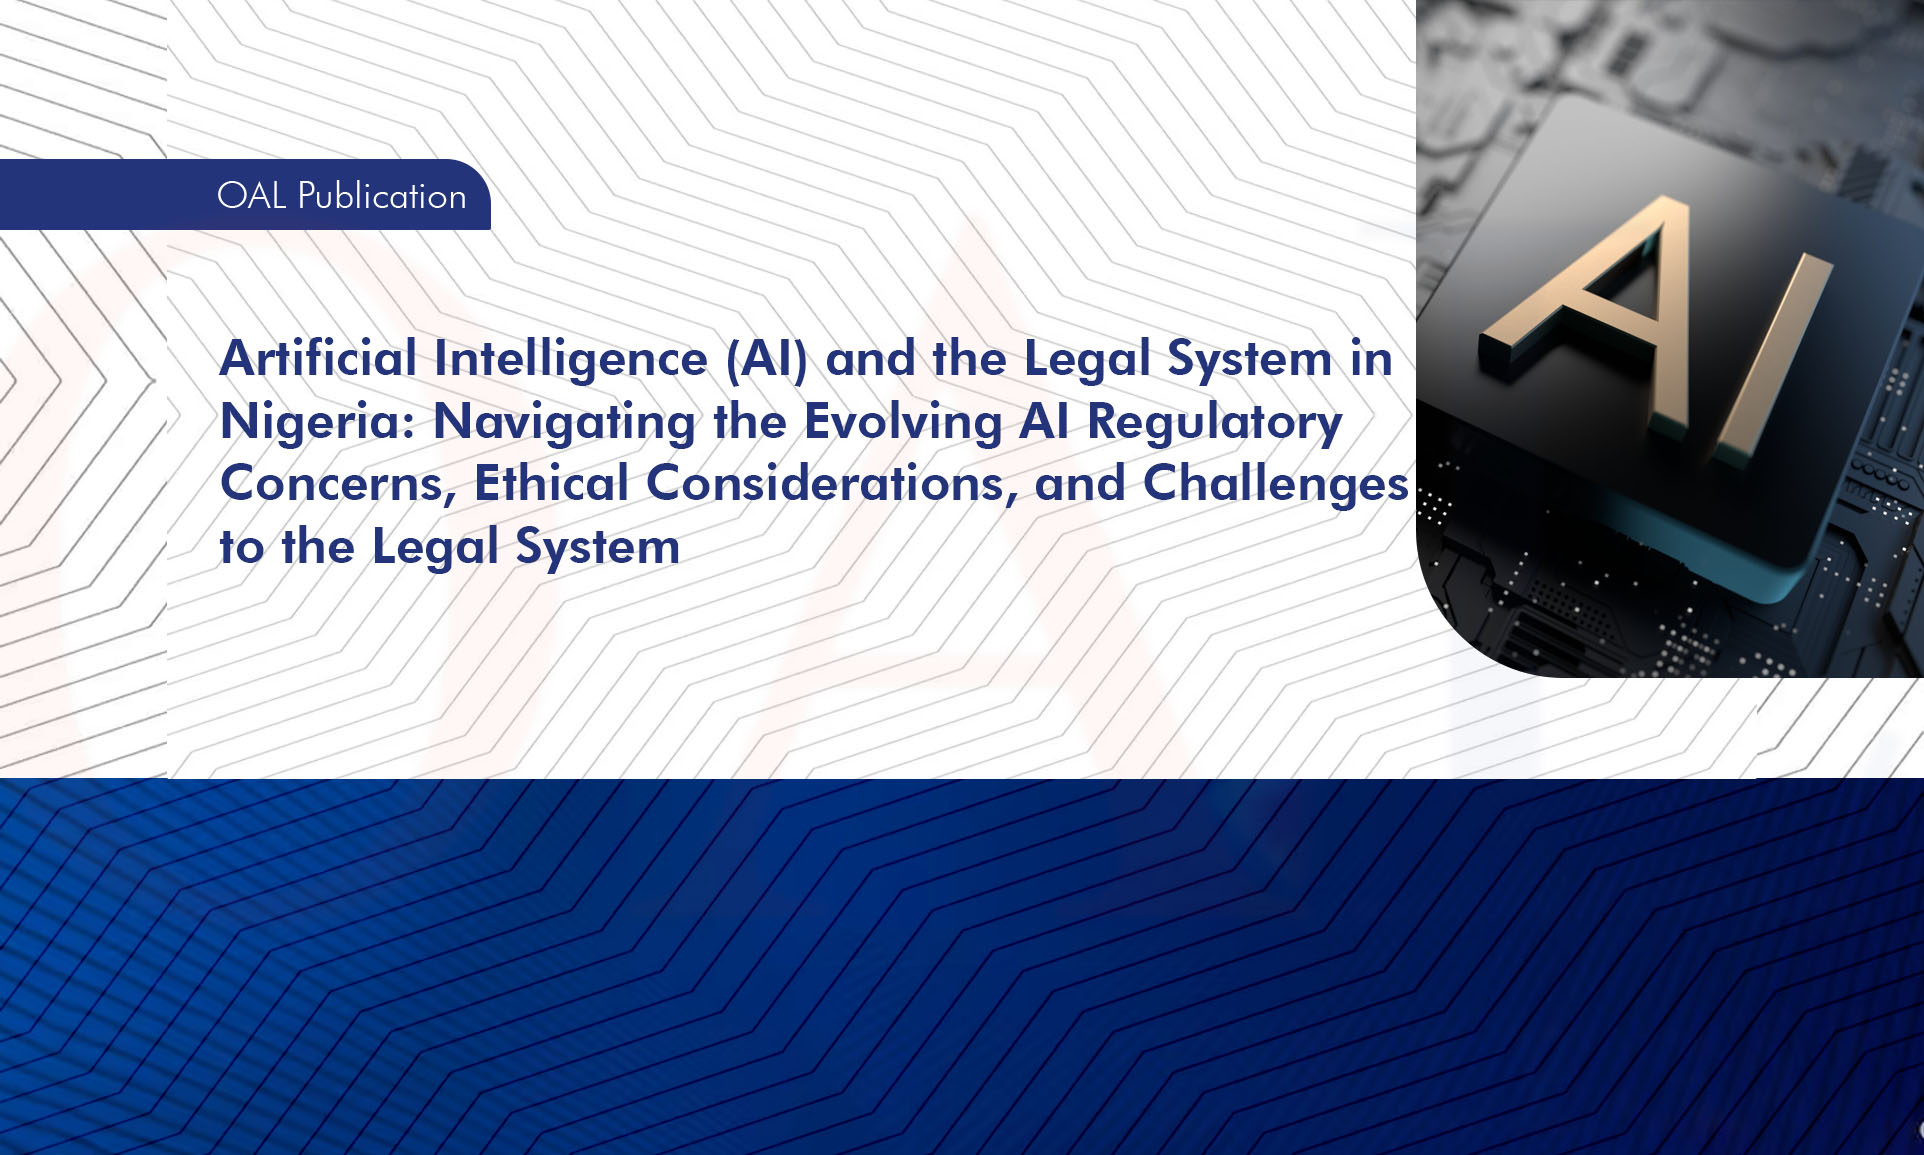 Artificial Intelligence (AI) and the Legal System in Nigeria: Navigating the Evolving AI Regulatory Concerns, Ethical Considerations, and Challenges to the Legal System